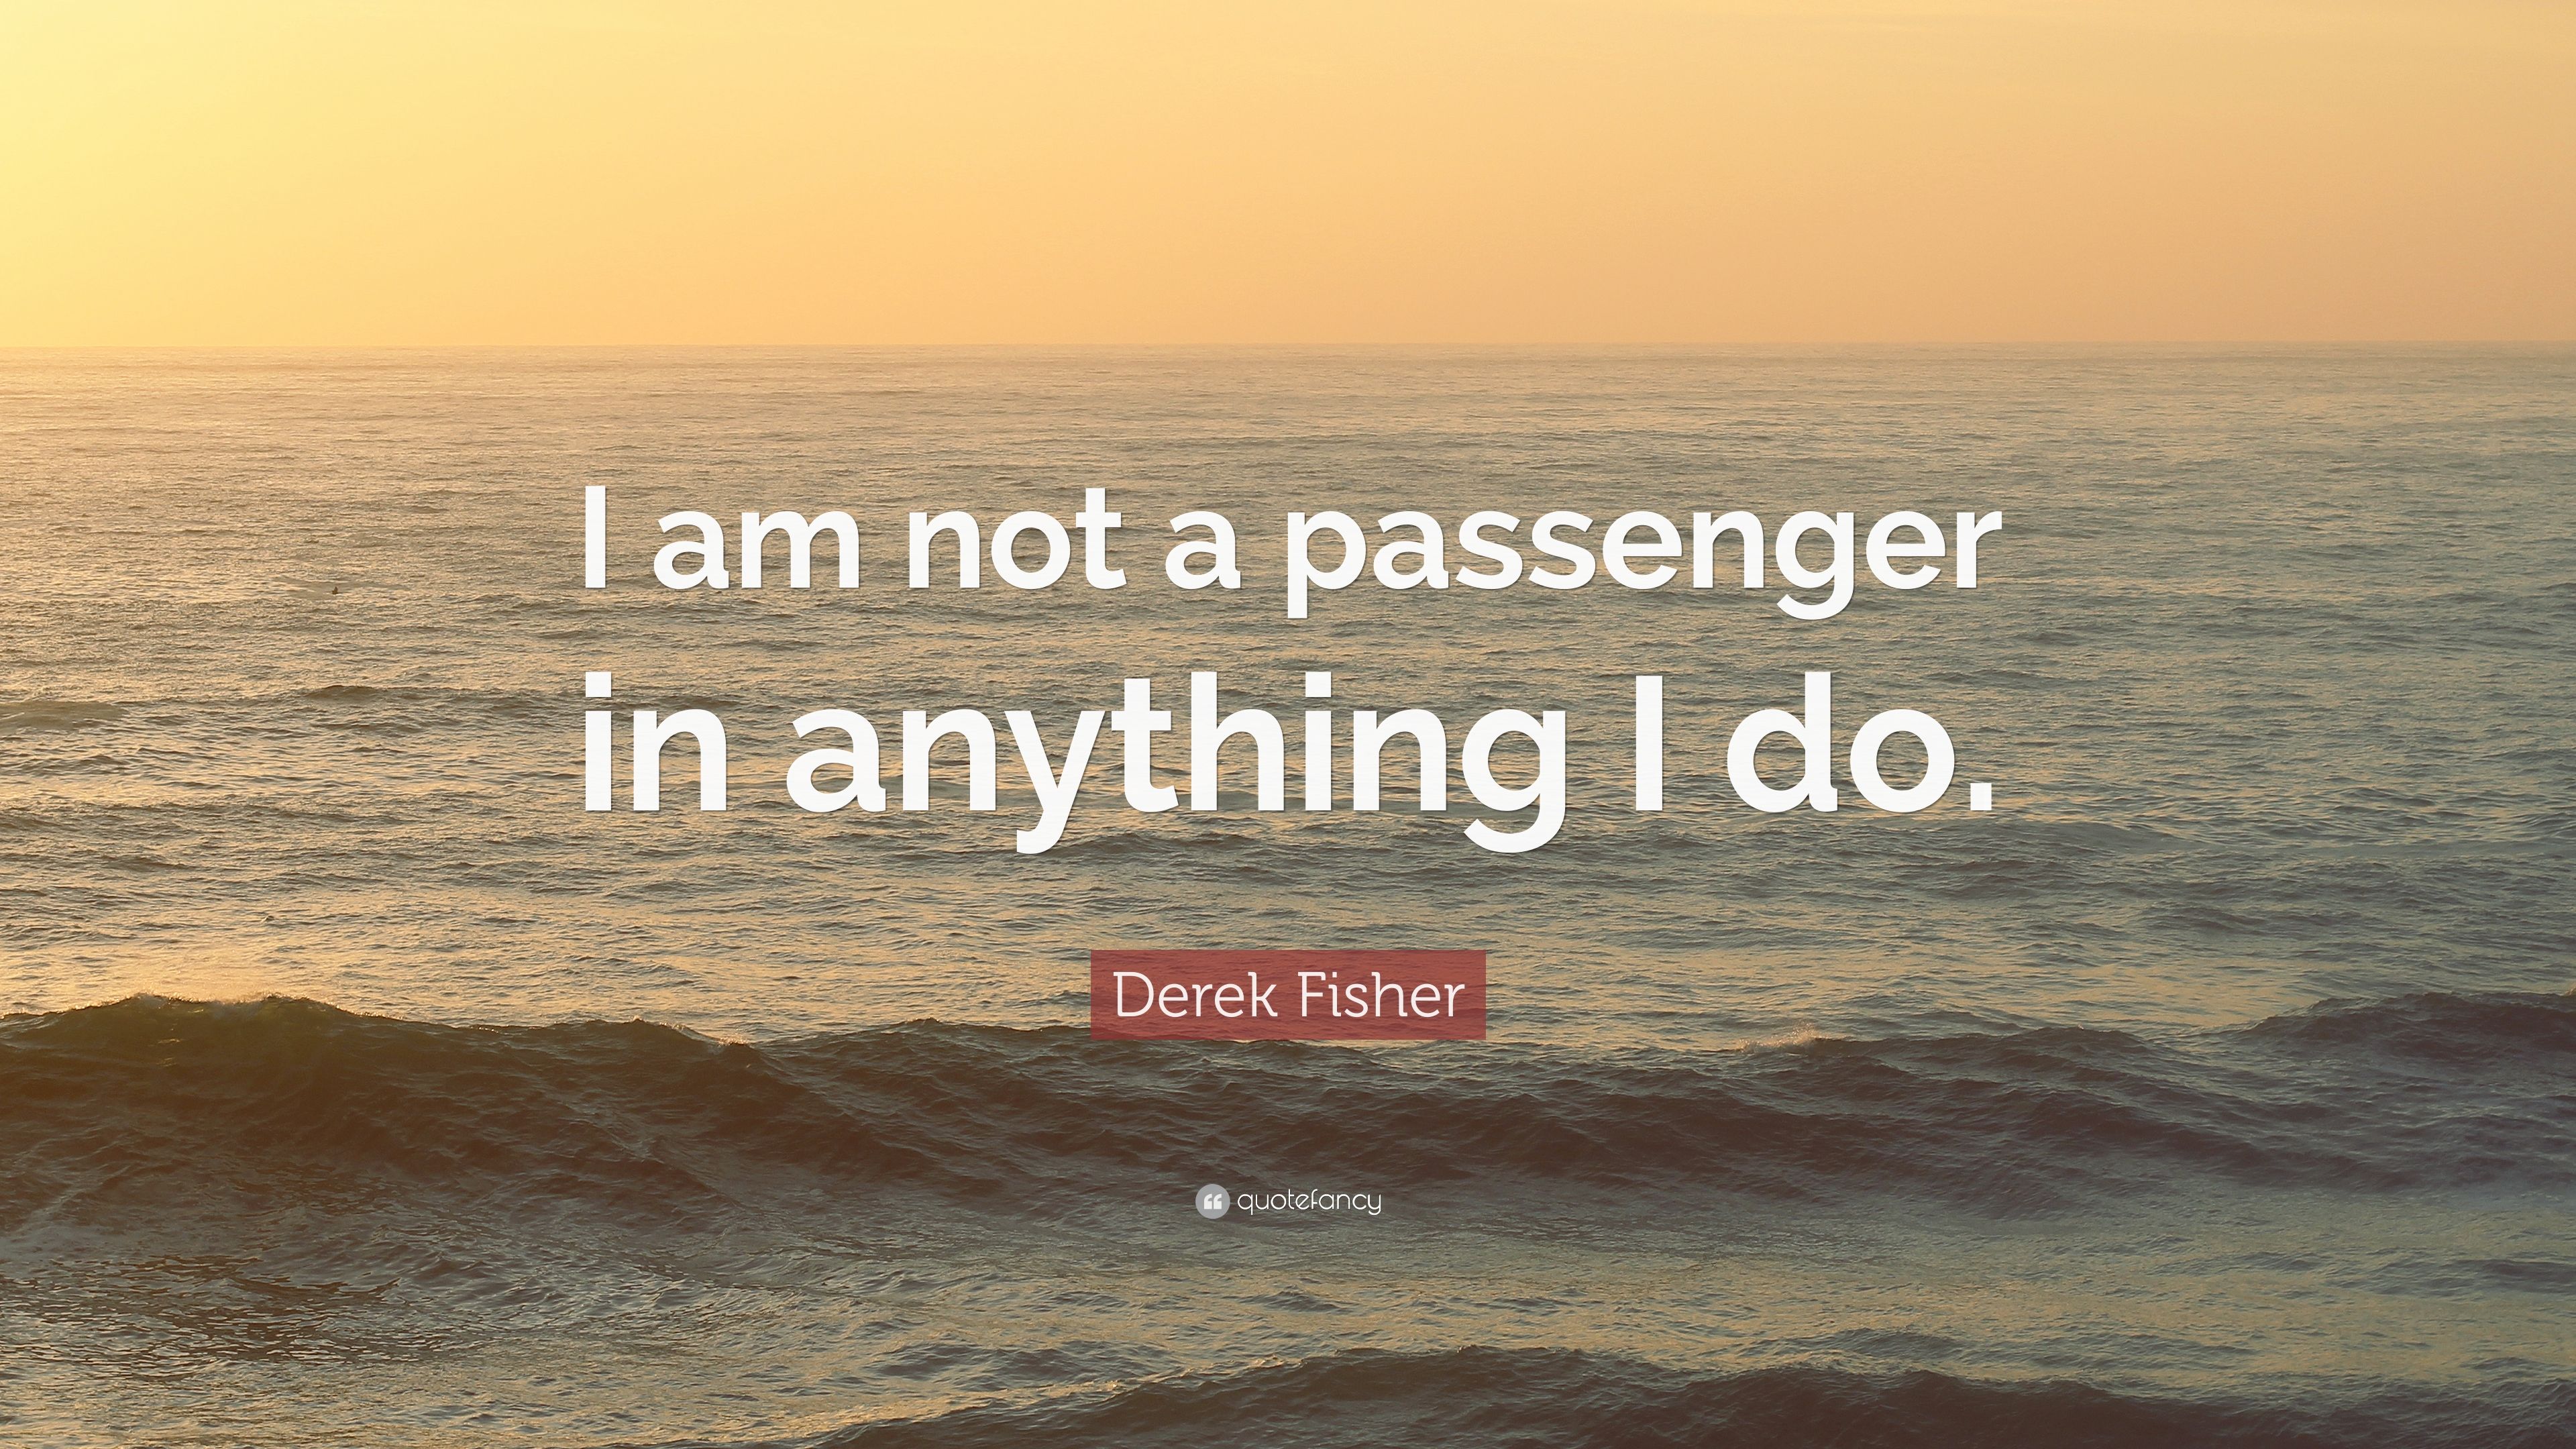 Derek Fisher Quote: “I am not a passenger in anything I do.” 5